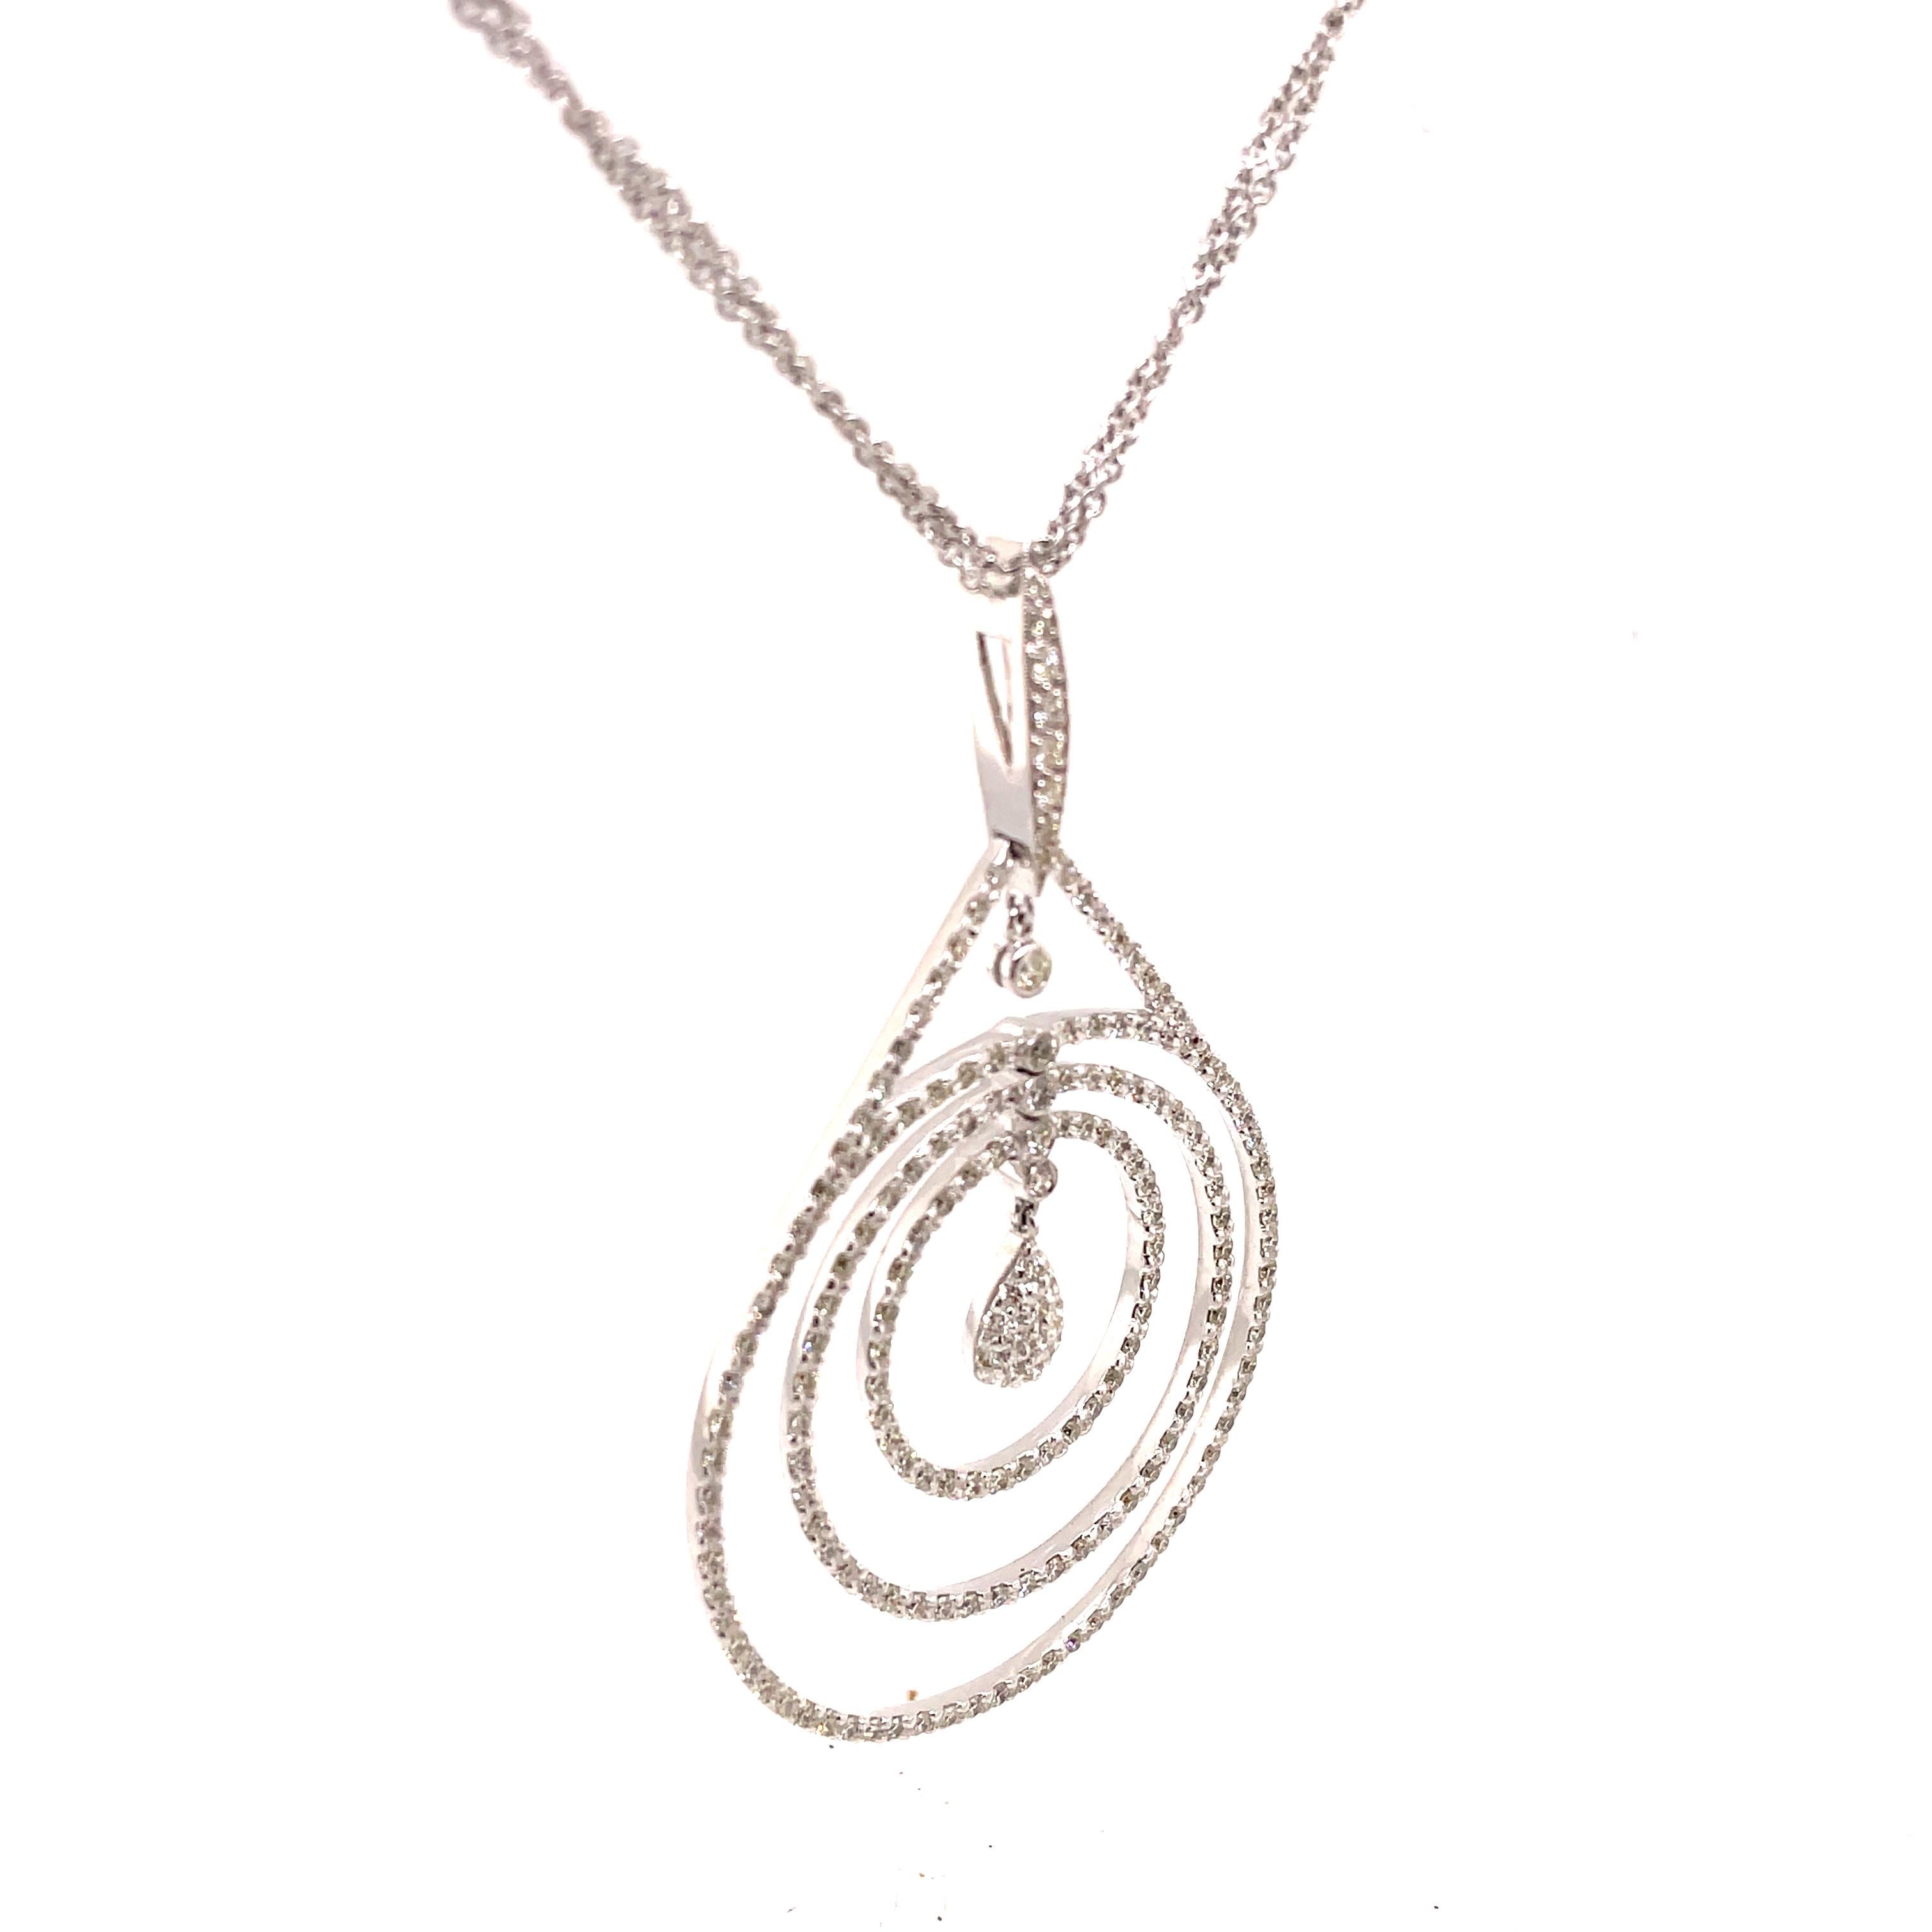 Contemporary 4.12ct Diamond Hoop Pendant Necklace 18k White Gold For Sale